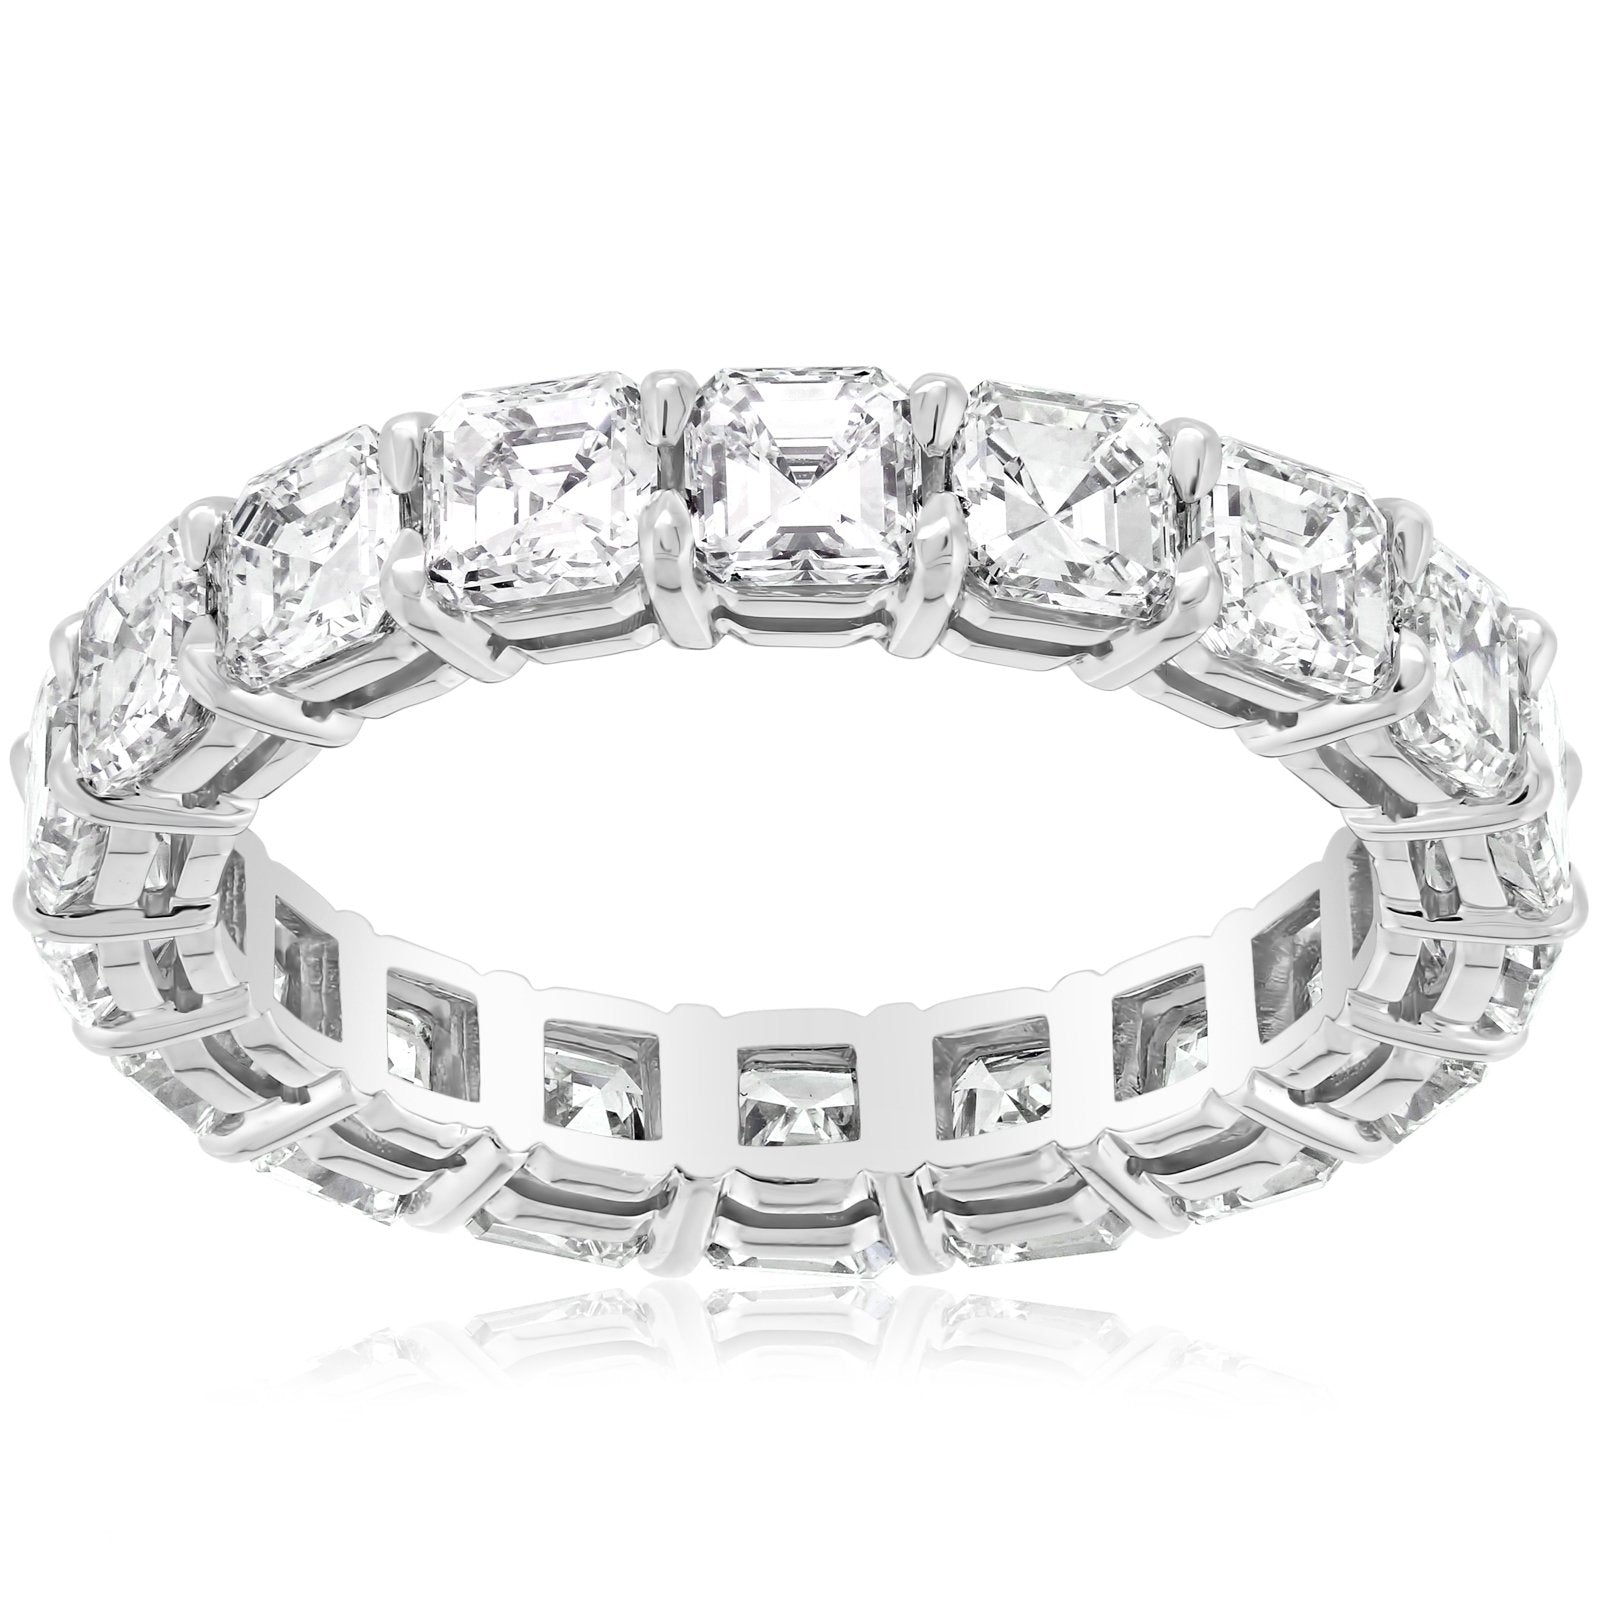 2 row marquise eternity ring - Royal Asscher Diamonds